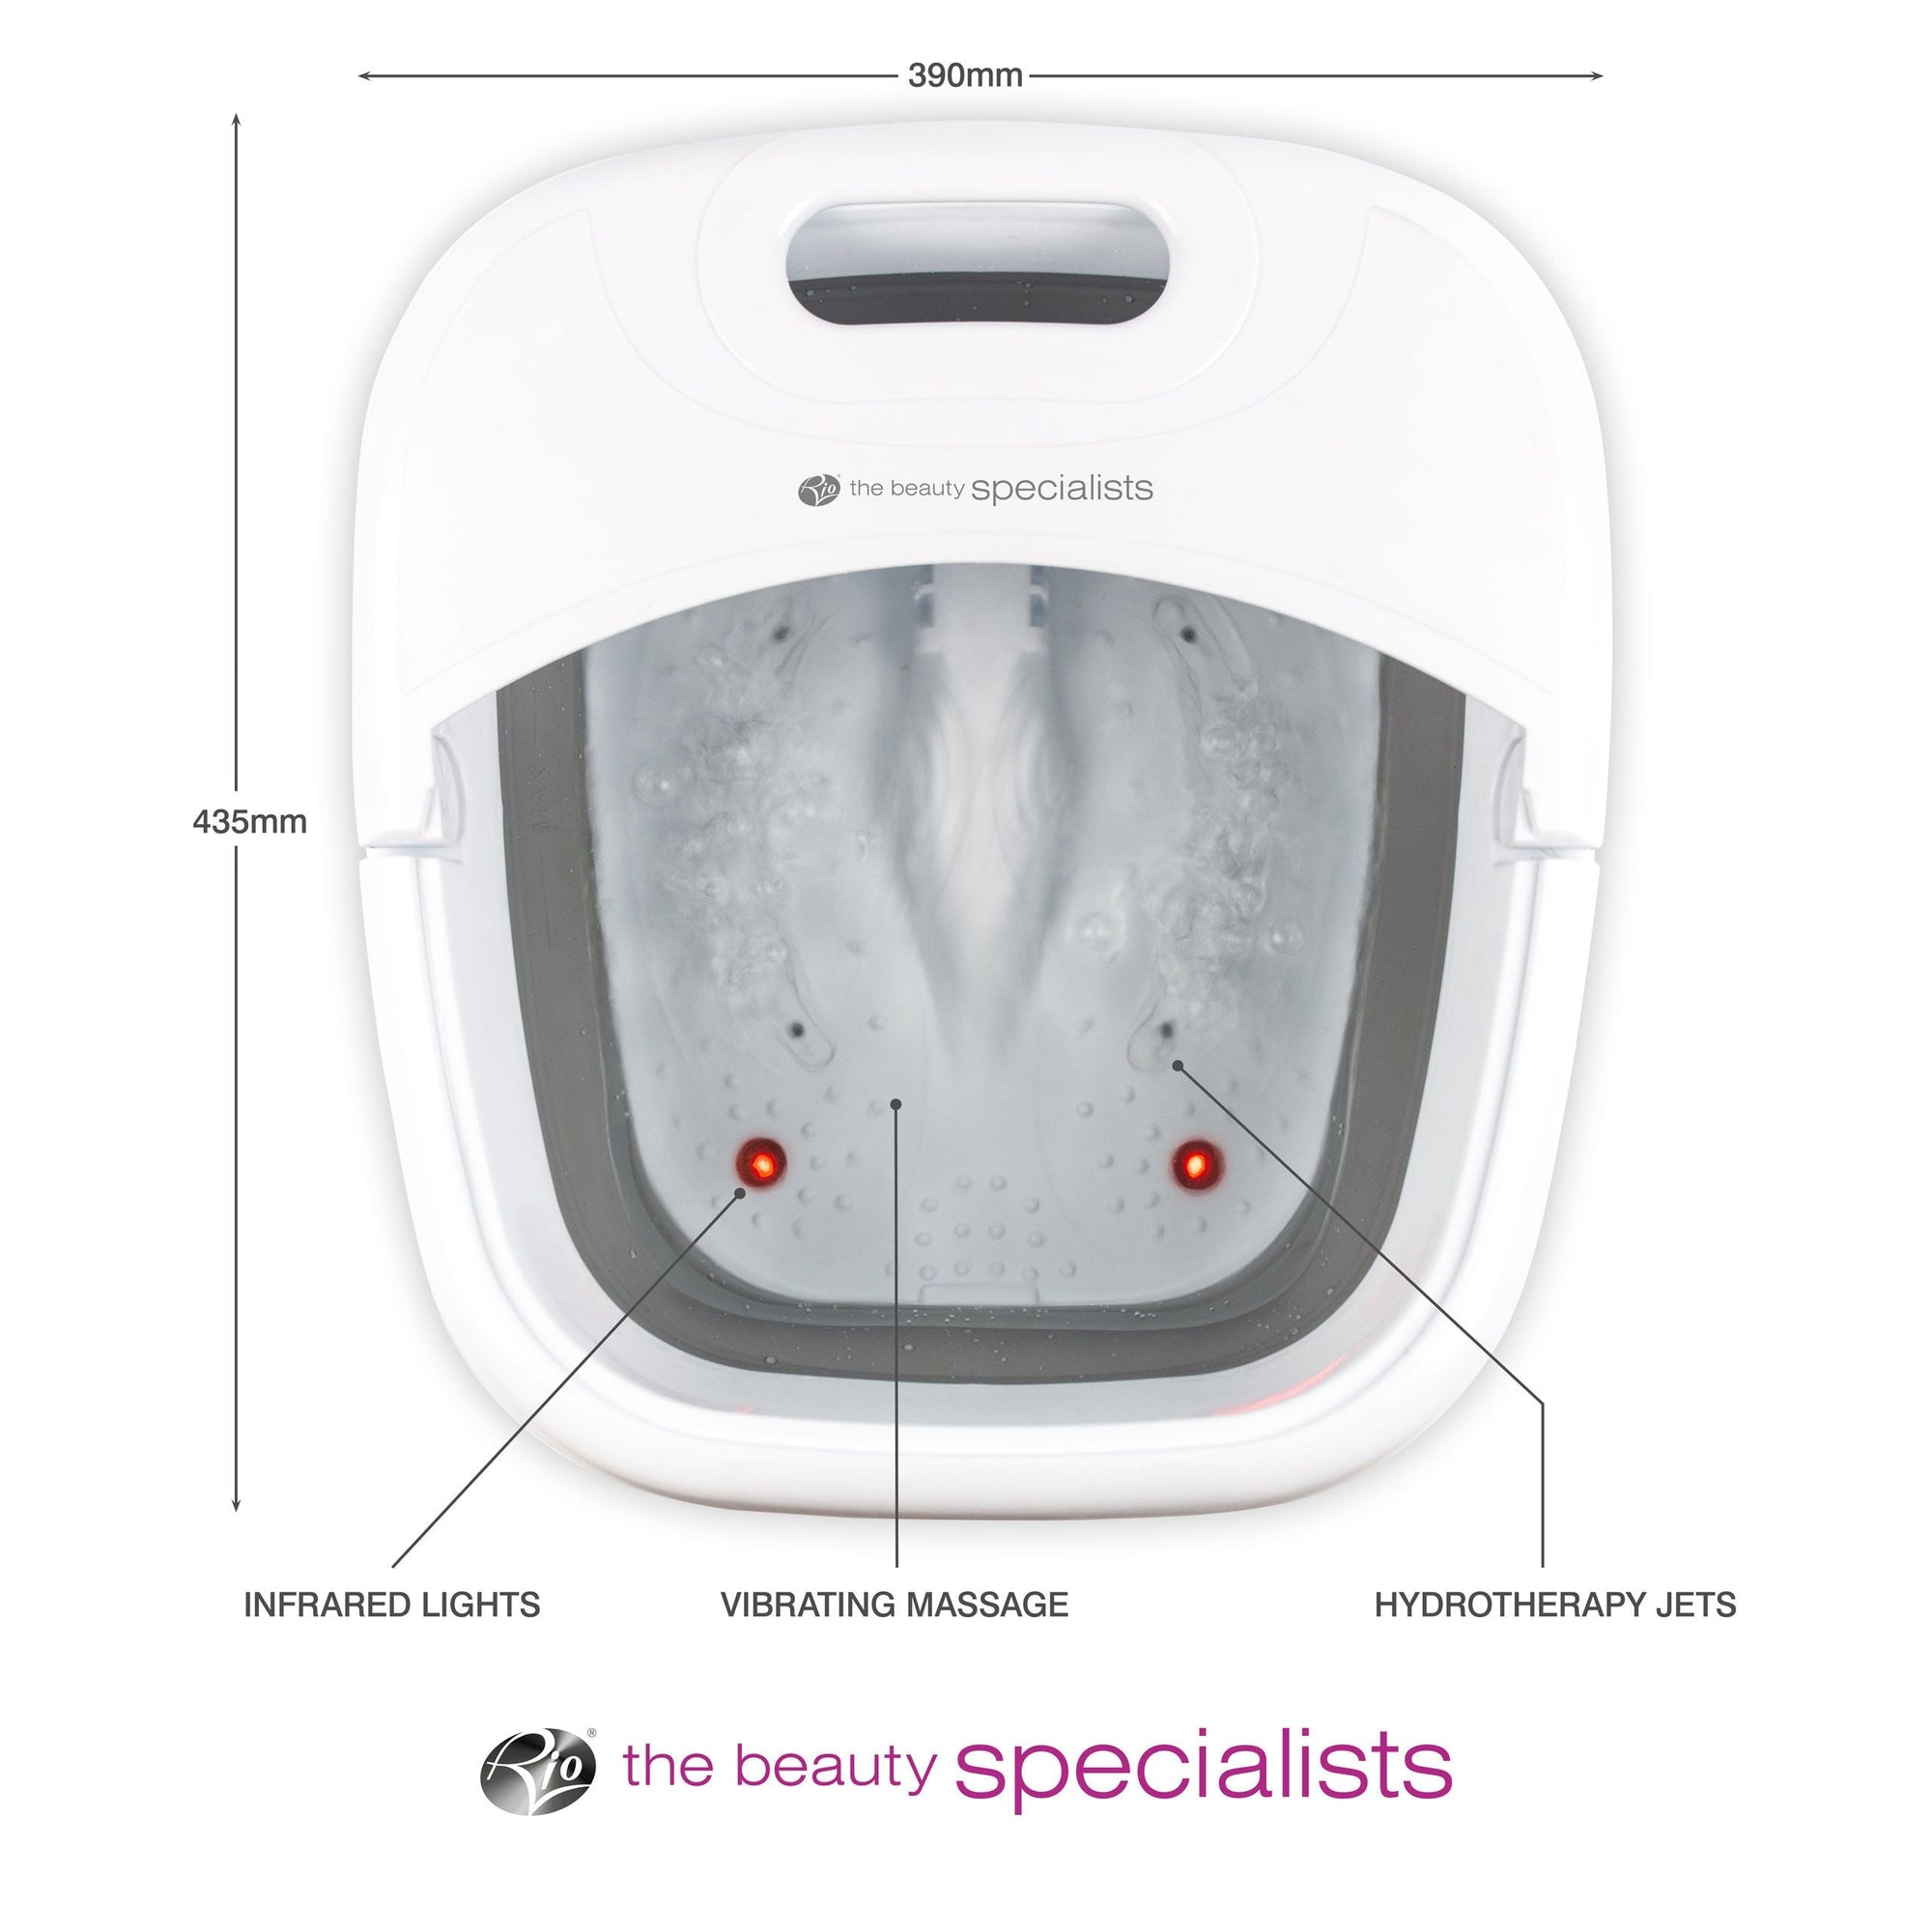 Foldaway foot spa bath with arrows labelling height 435mm and width 390mm and arrows pointing to infrared lights, vibrating massage and hydrotherapy jets 